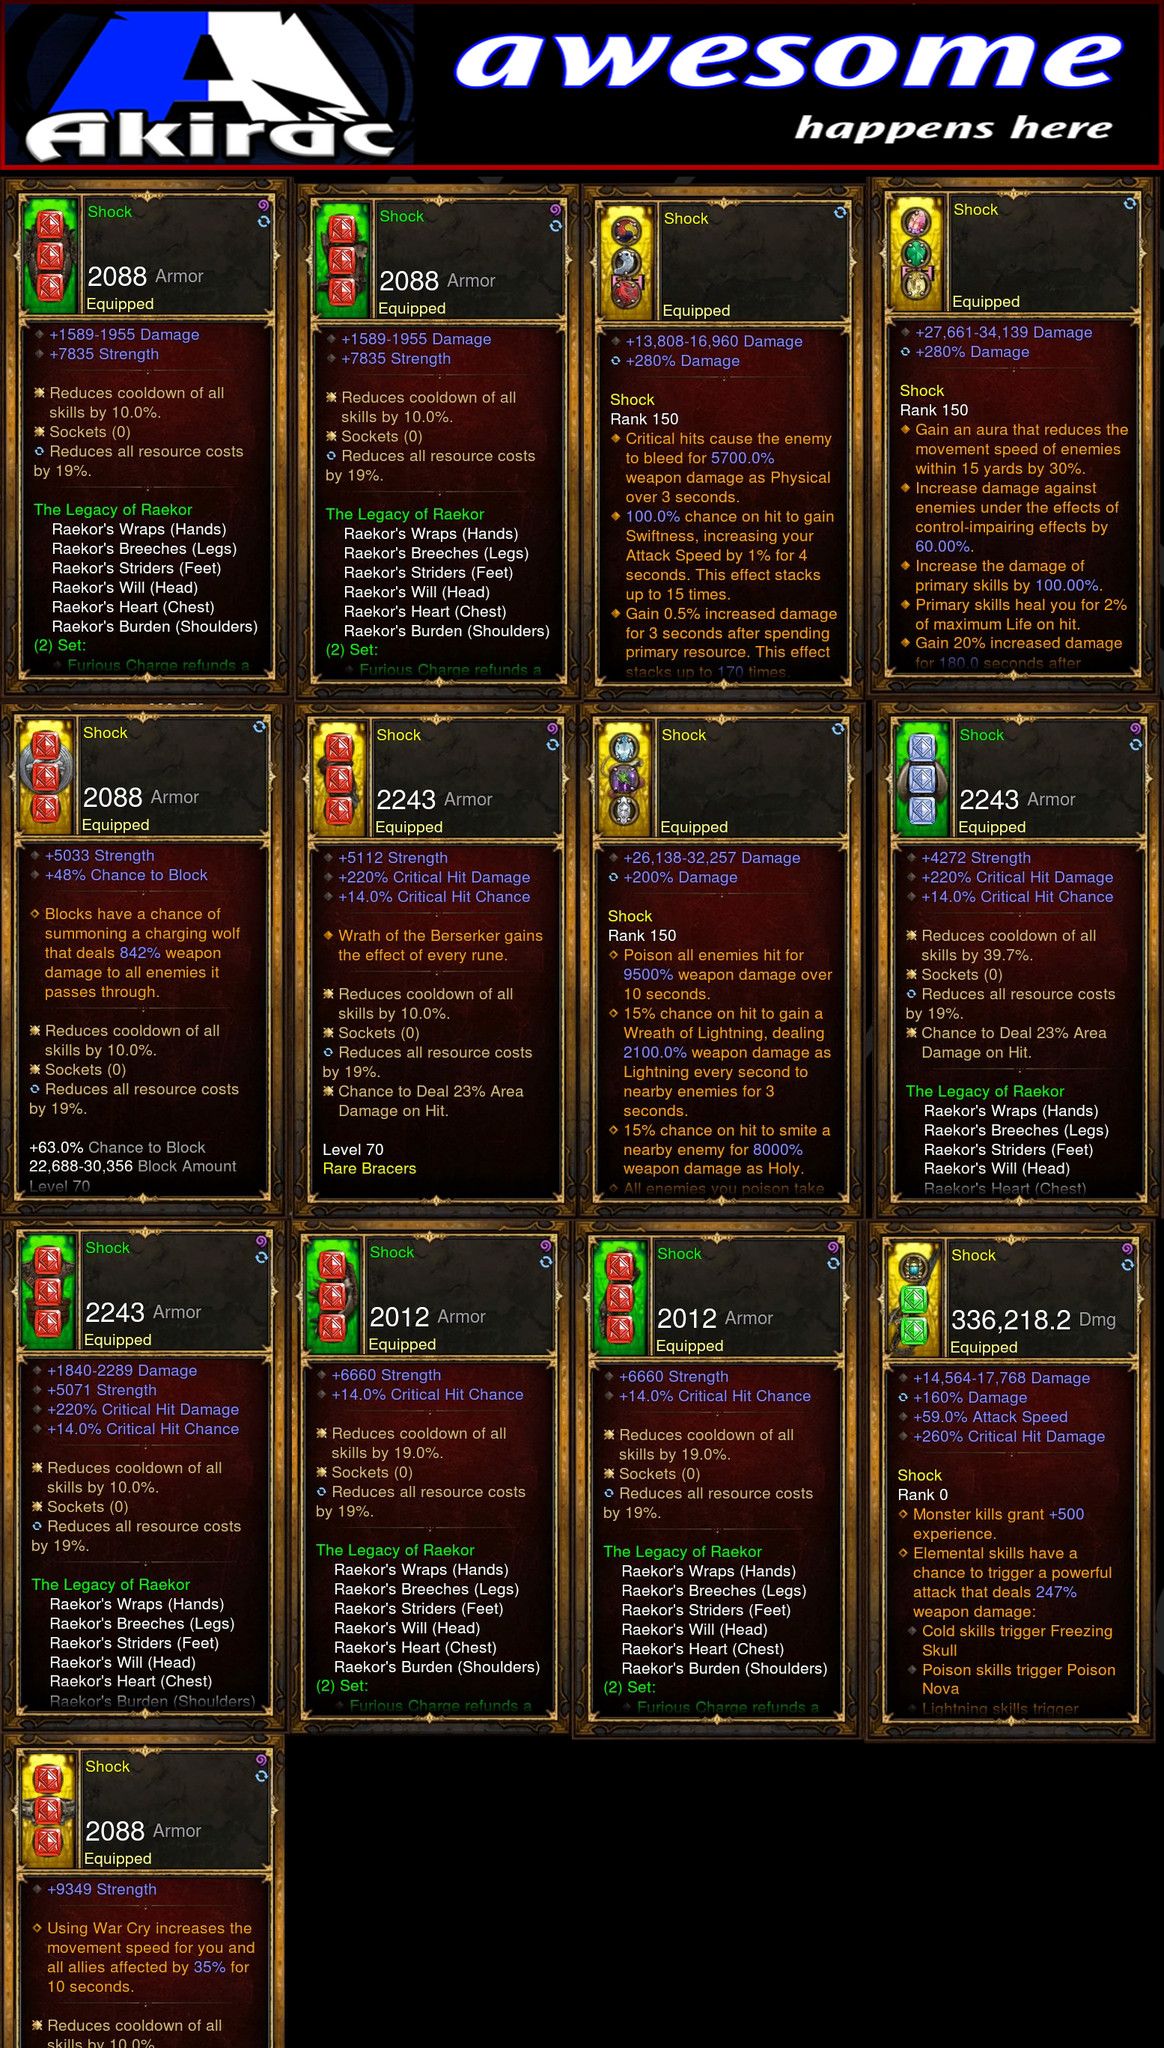 Shock v1 Raekor Barbarian Set for Rift Climbing Diablo 3 Mods ROS Seasonal and Non Seasonal Save Mod - Modded Items and Gear - Hacks - Cheats - Trainers for Playstation 4 - Playstation 5 - Nintendo Switch - Xbox One